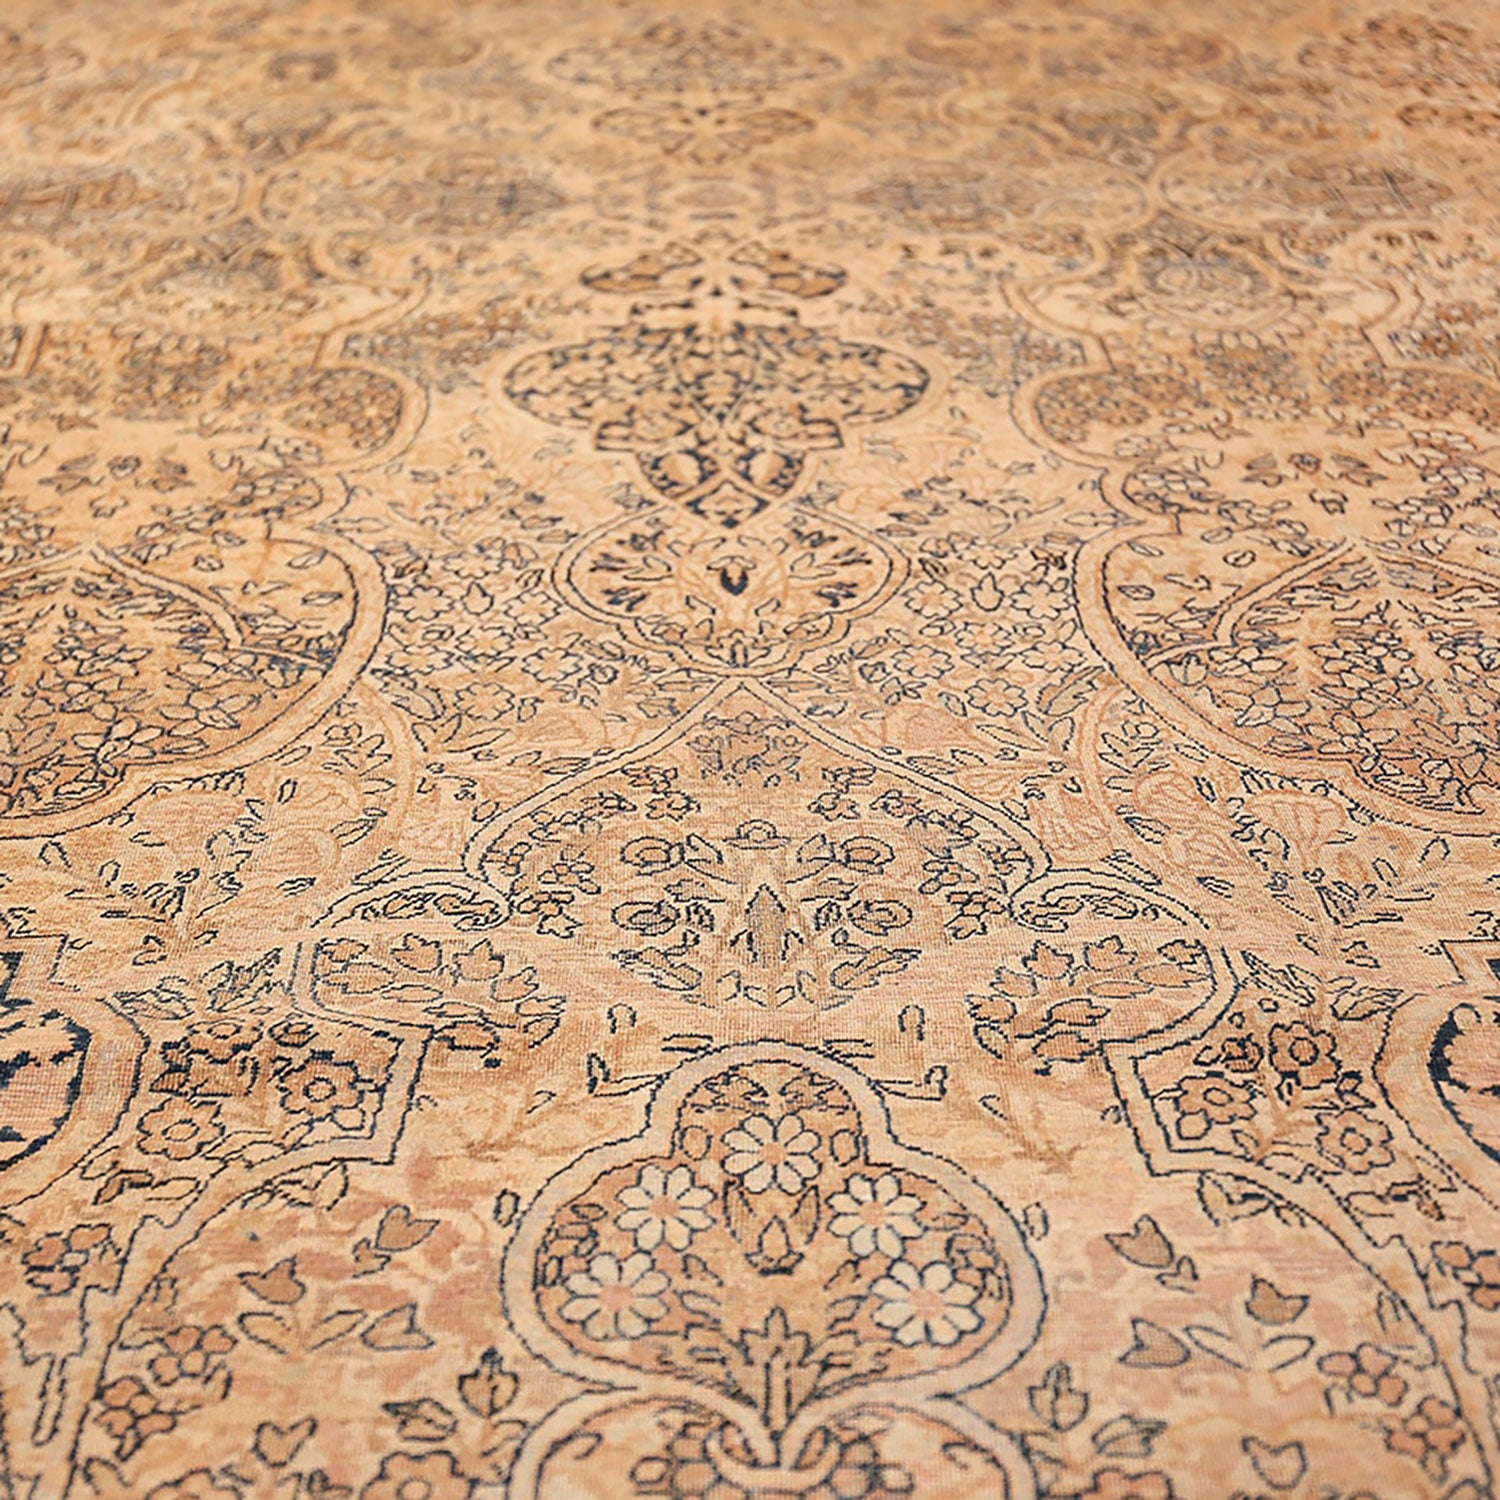 Exquisite handcrafted rug with intricate botanical motifs and warm tones